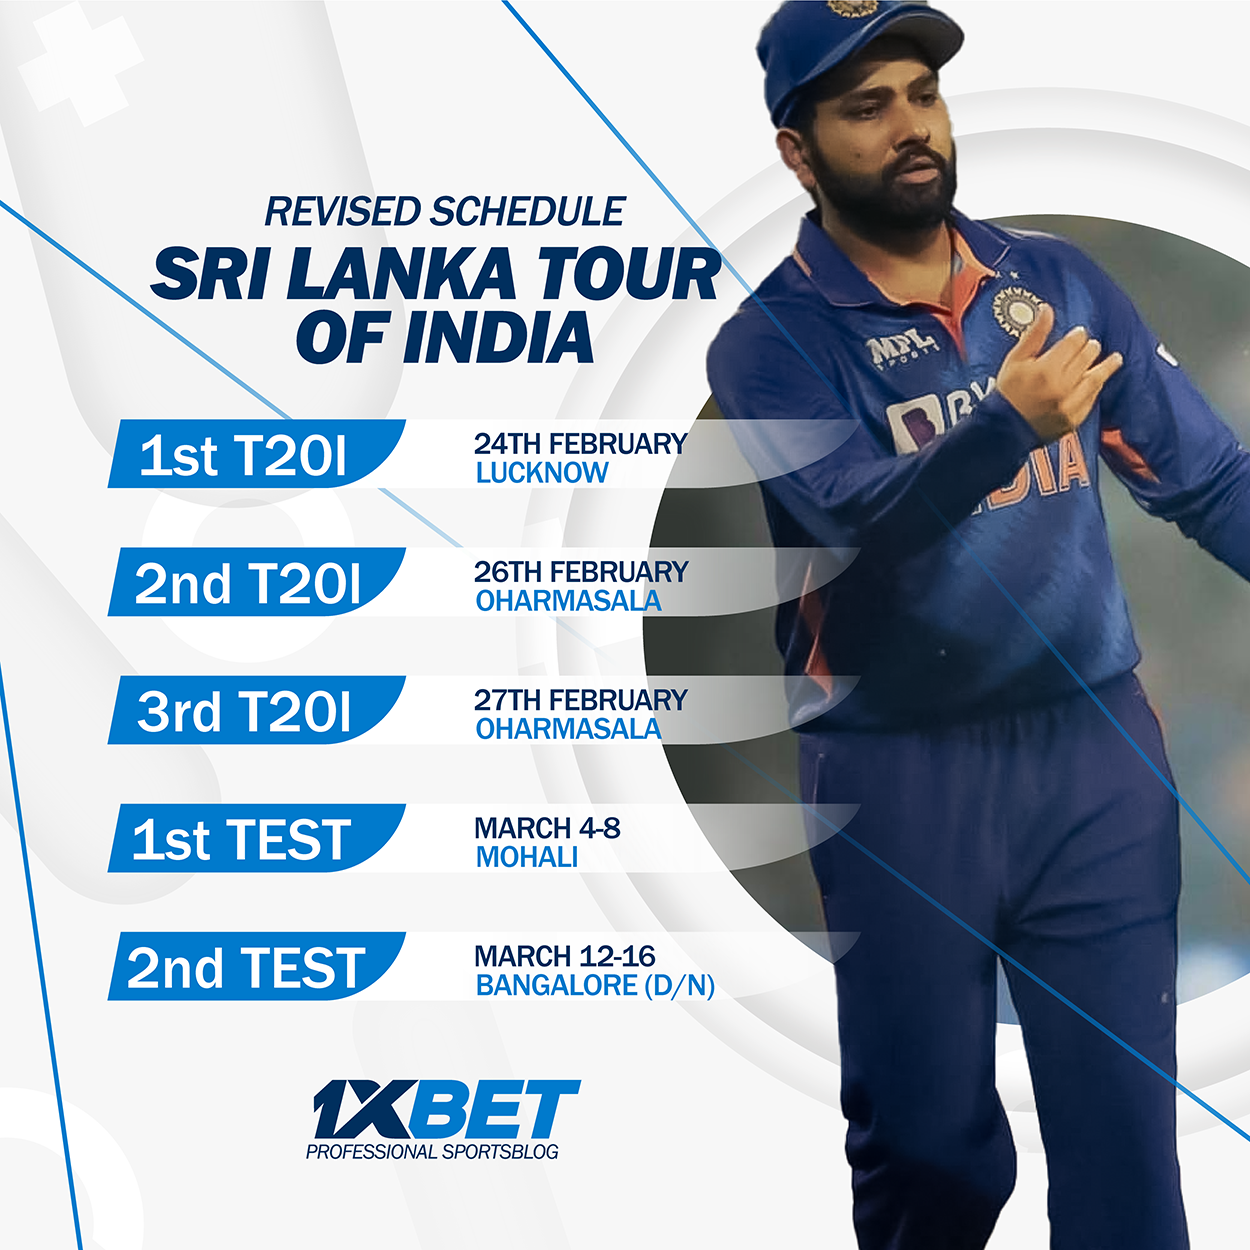 Sri Lanka tour of India: revised schedule for upcoming Test and T20I series